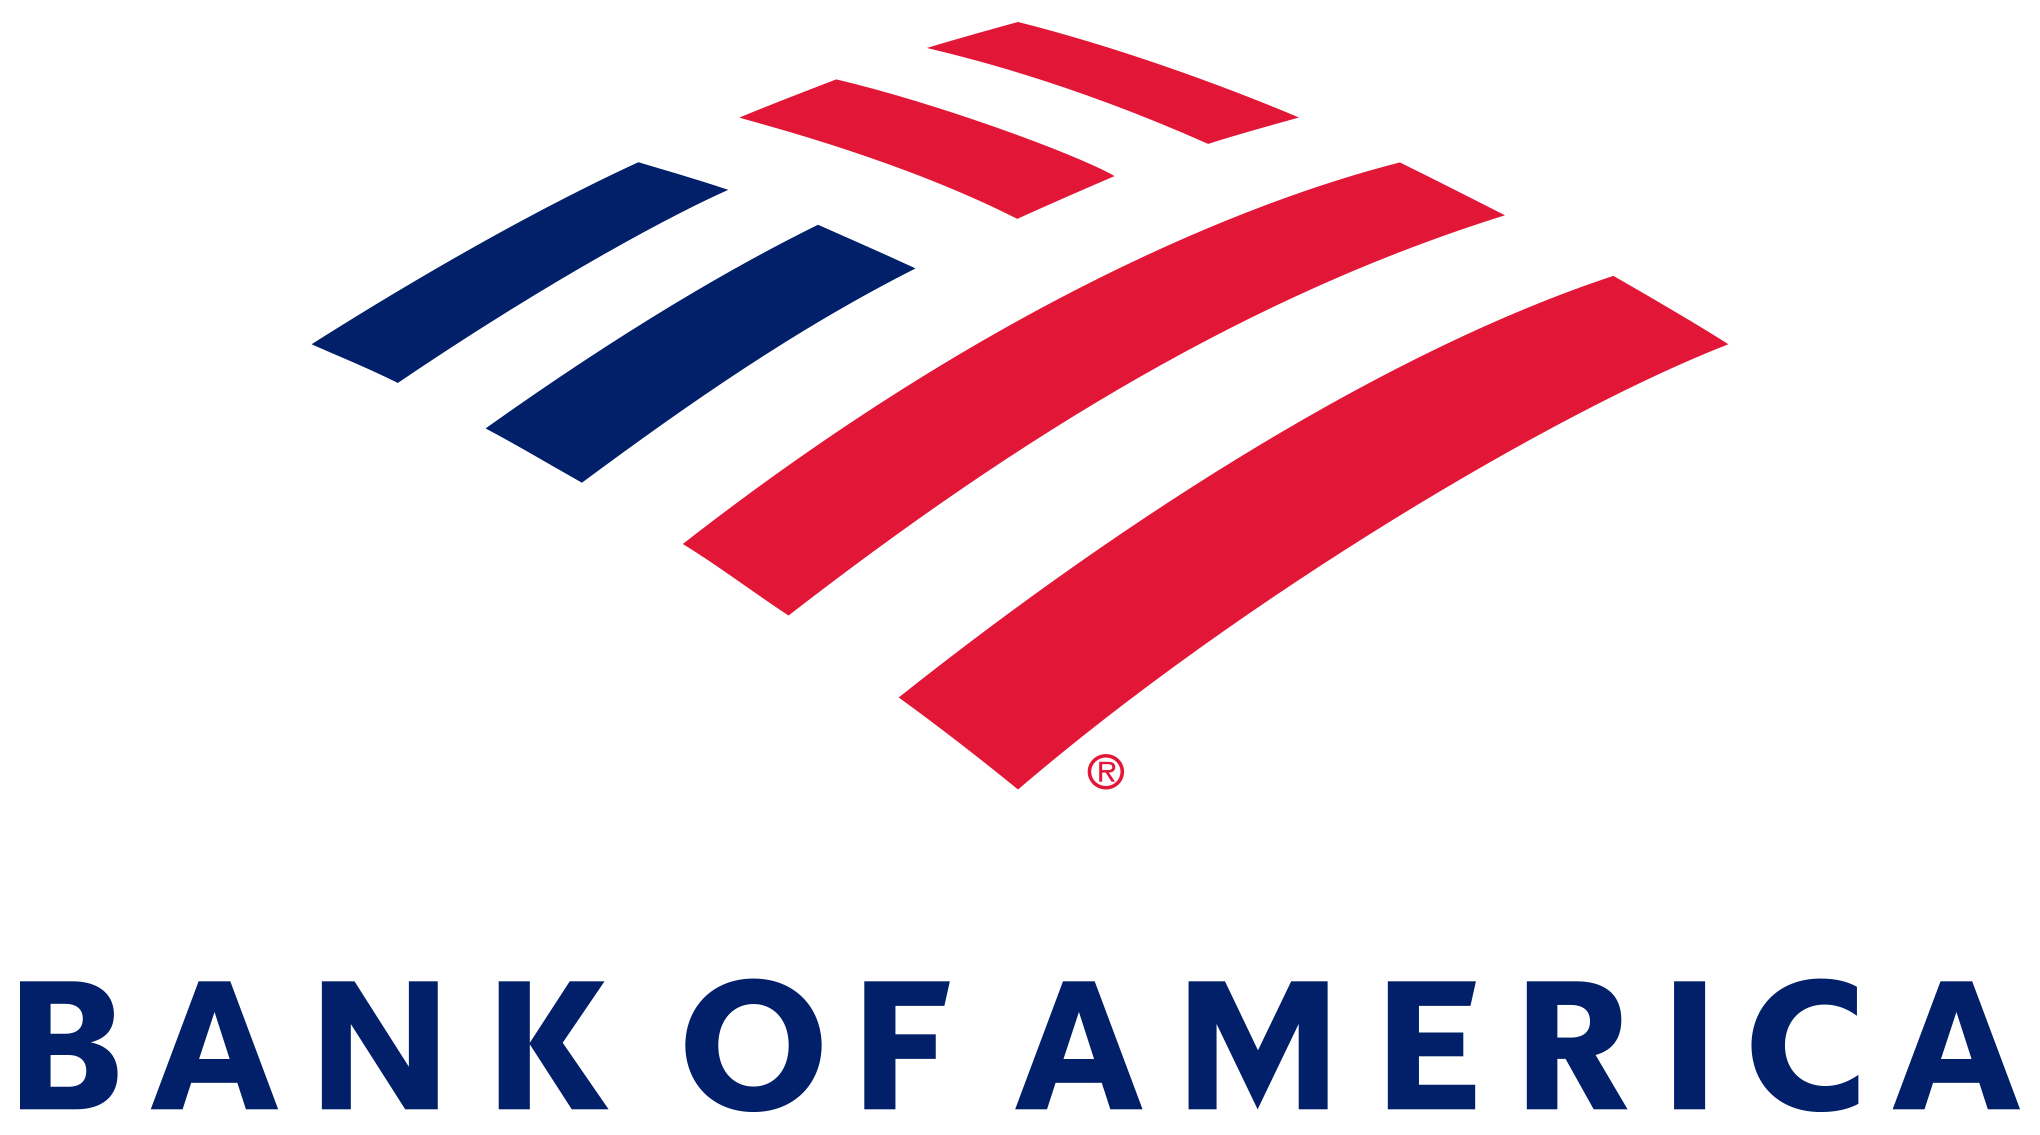 Bank of America Logo - Brand New: New Logo for Bank of America by Lippincott